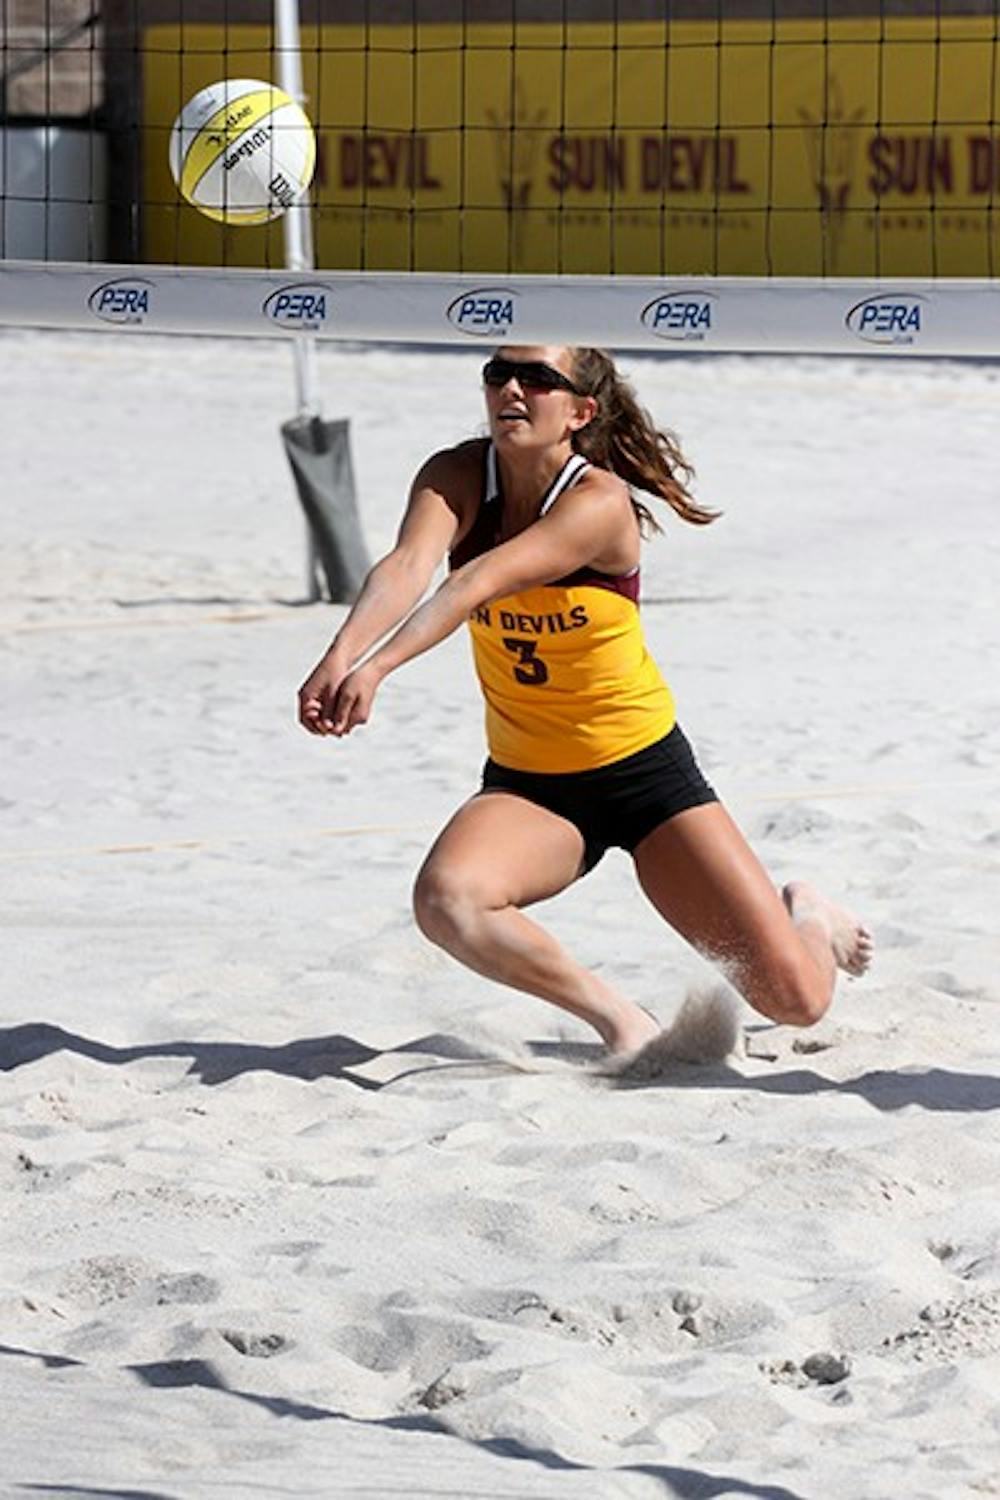 Freshman Genevieve Pirotte digs a ball in the sand volleyball program’s first home match on Wednesday, March 26 at the PERA Club in Tempe. Pirotte and her partner, freshman BreElle Bailey, lost their game in three sets. (Photo by Benjamin Margiott)